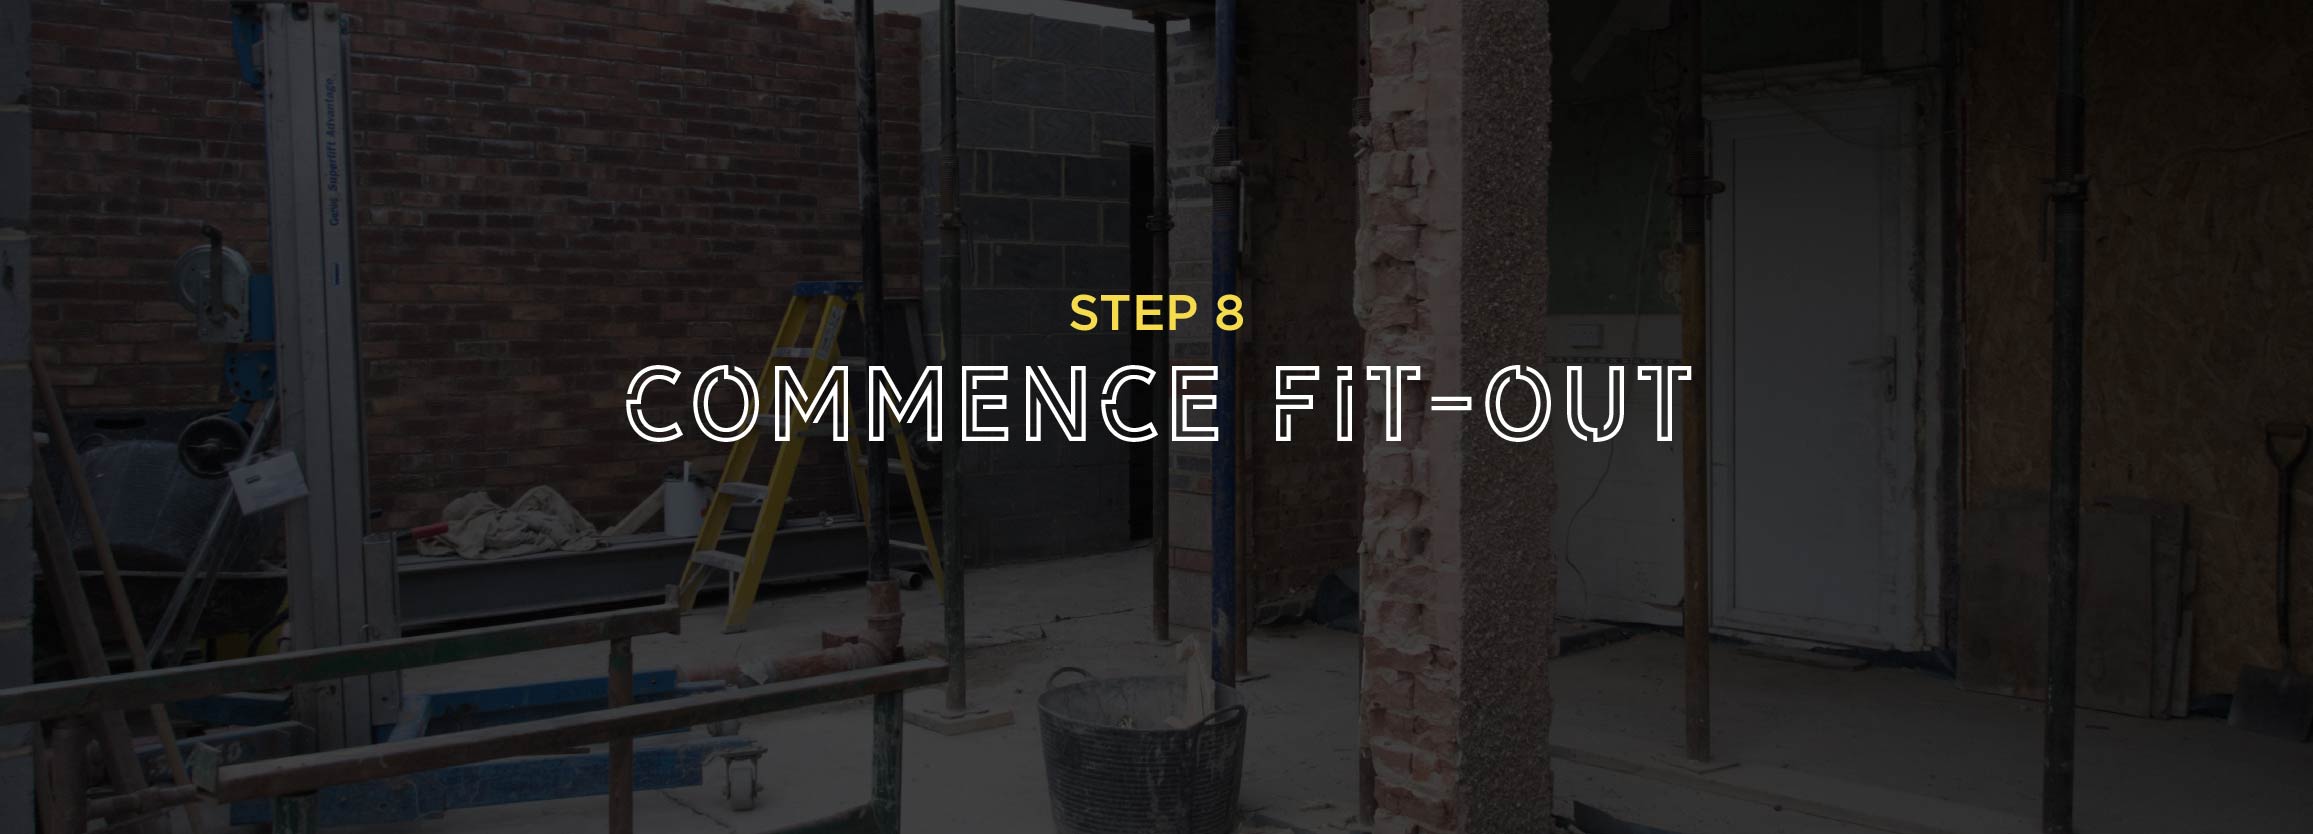 Step 8 - Commence fit-out